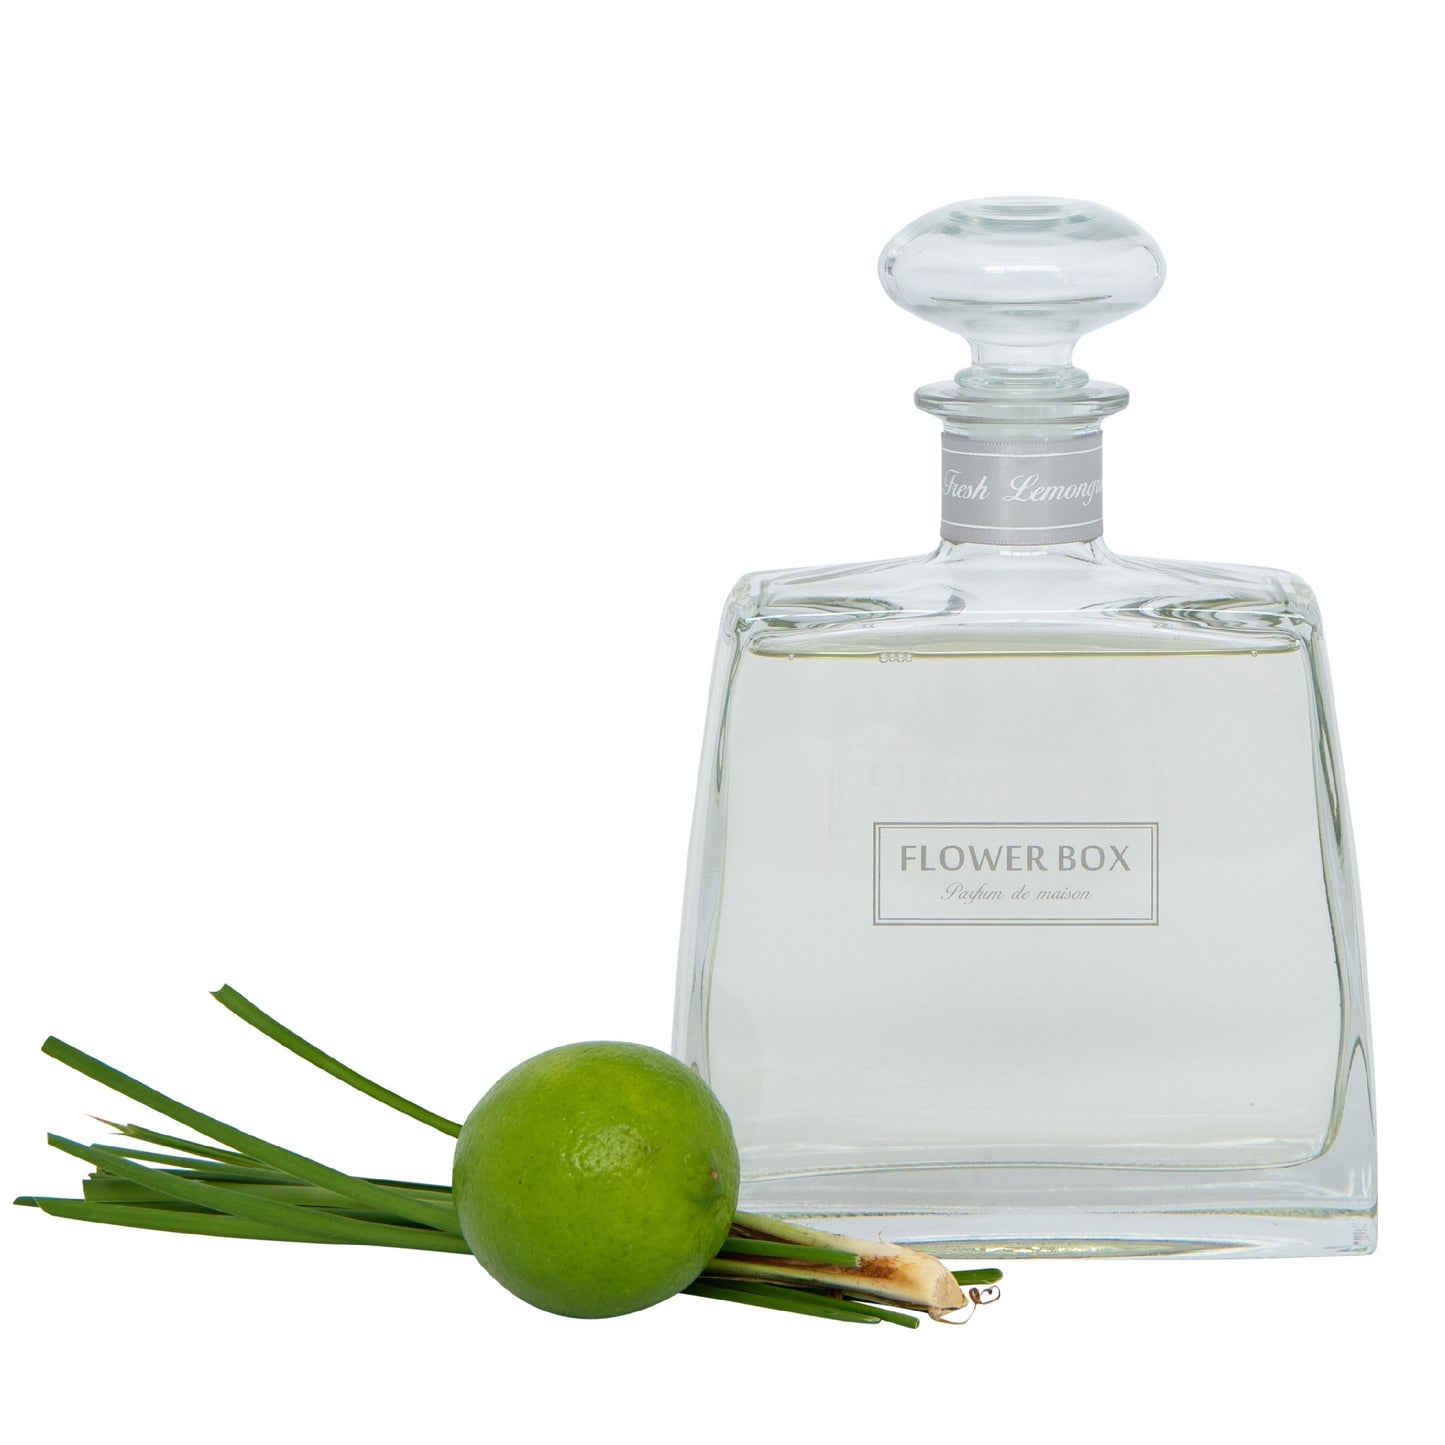 Hallmark Diffuser | Fresh Lemongrass The unmistakable fragrances of Lemongrass and Lime Zest are here merged with fresh Lemon Peel over soft floral and Vanilla undertones.  This revitalising fragrance will have you energised and feeling fresh.